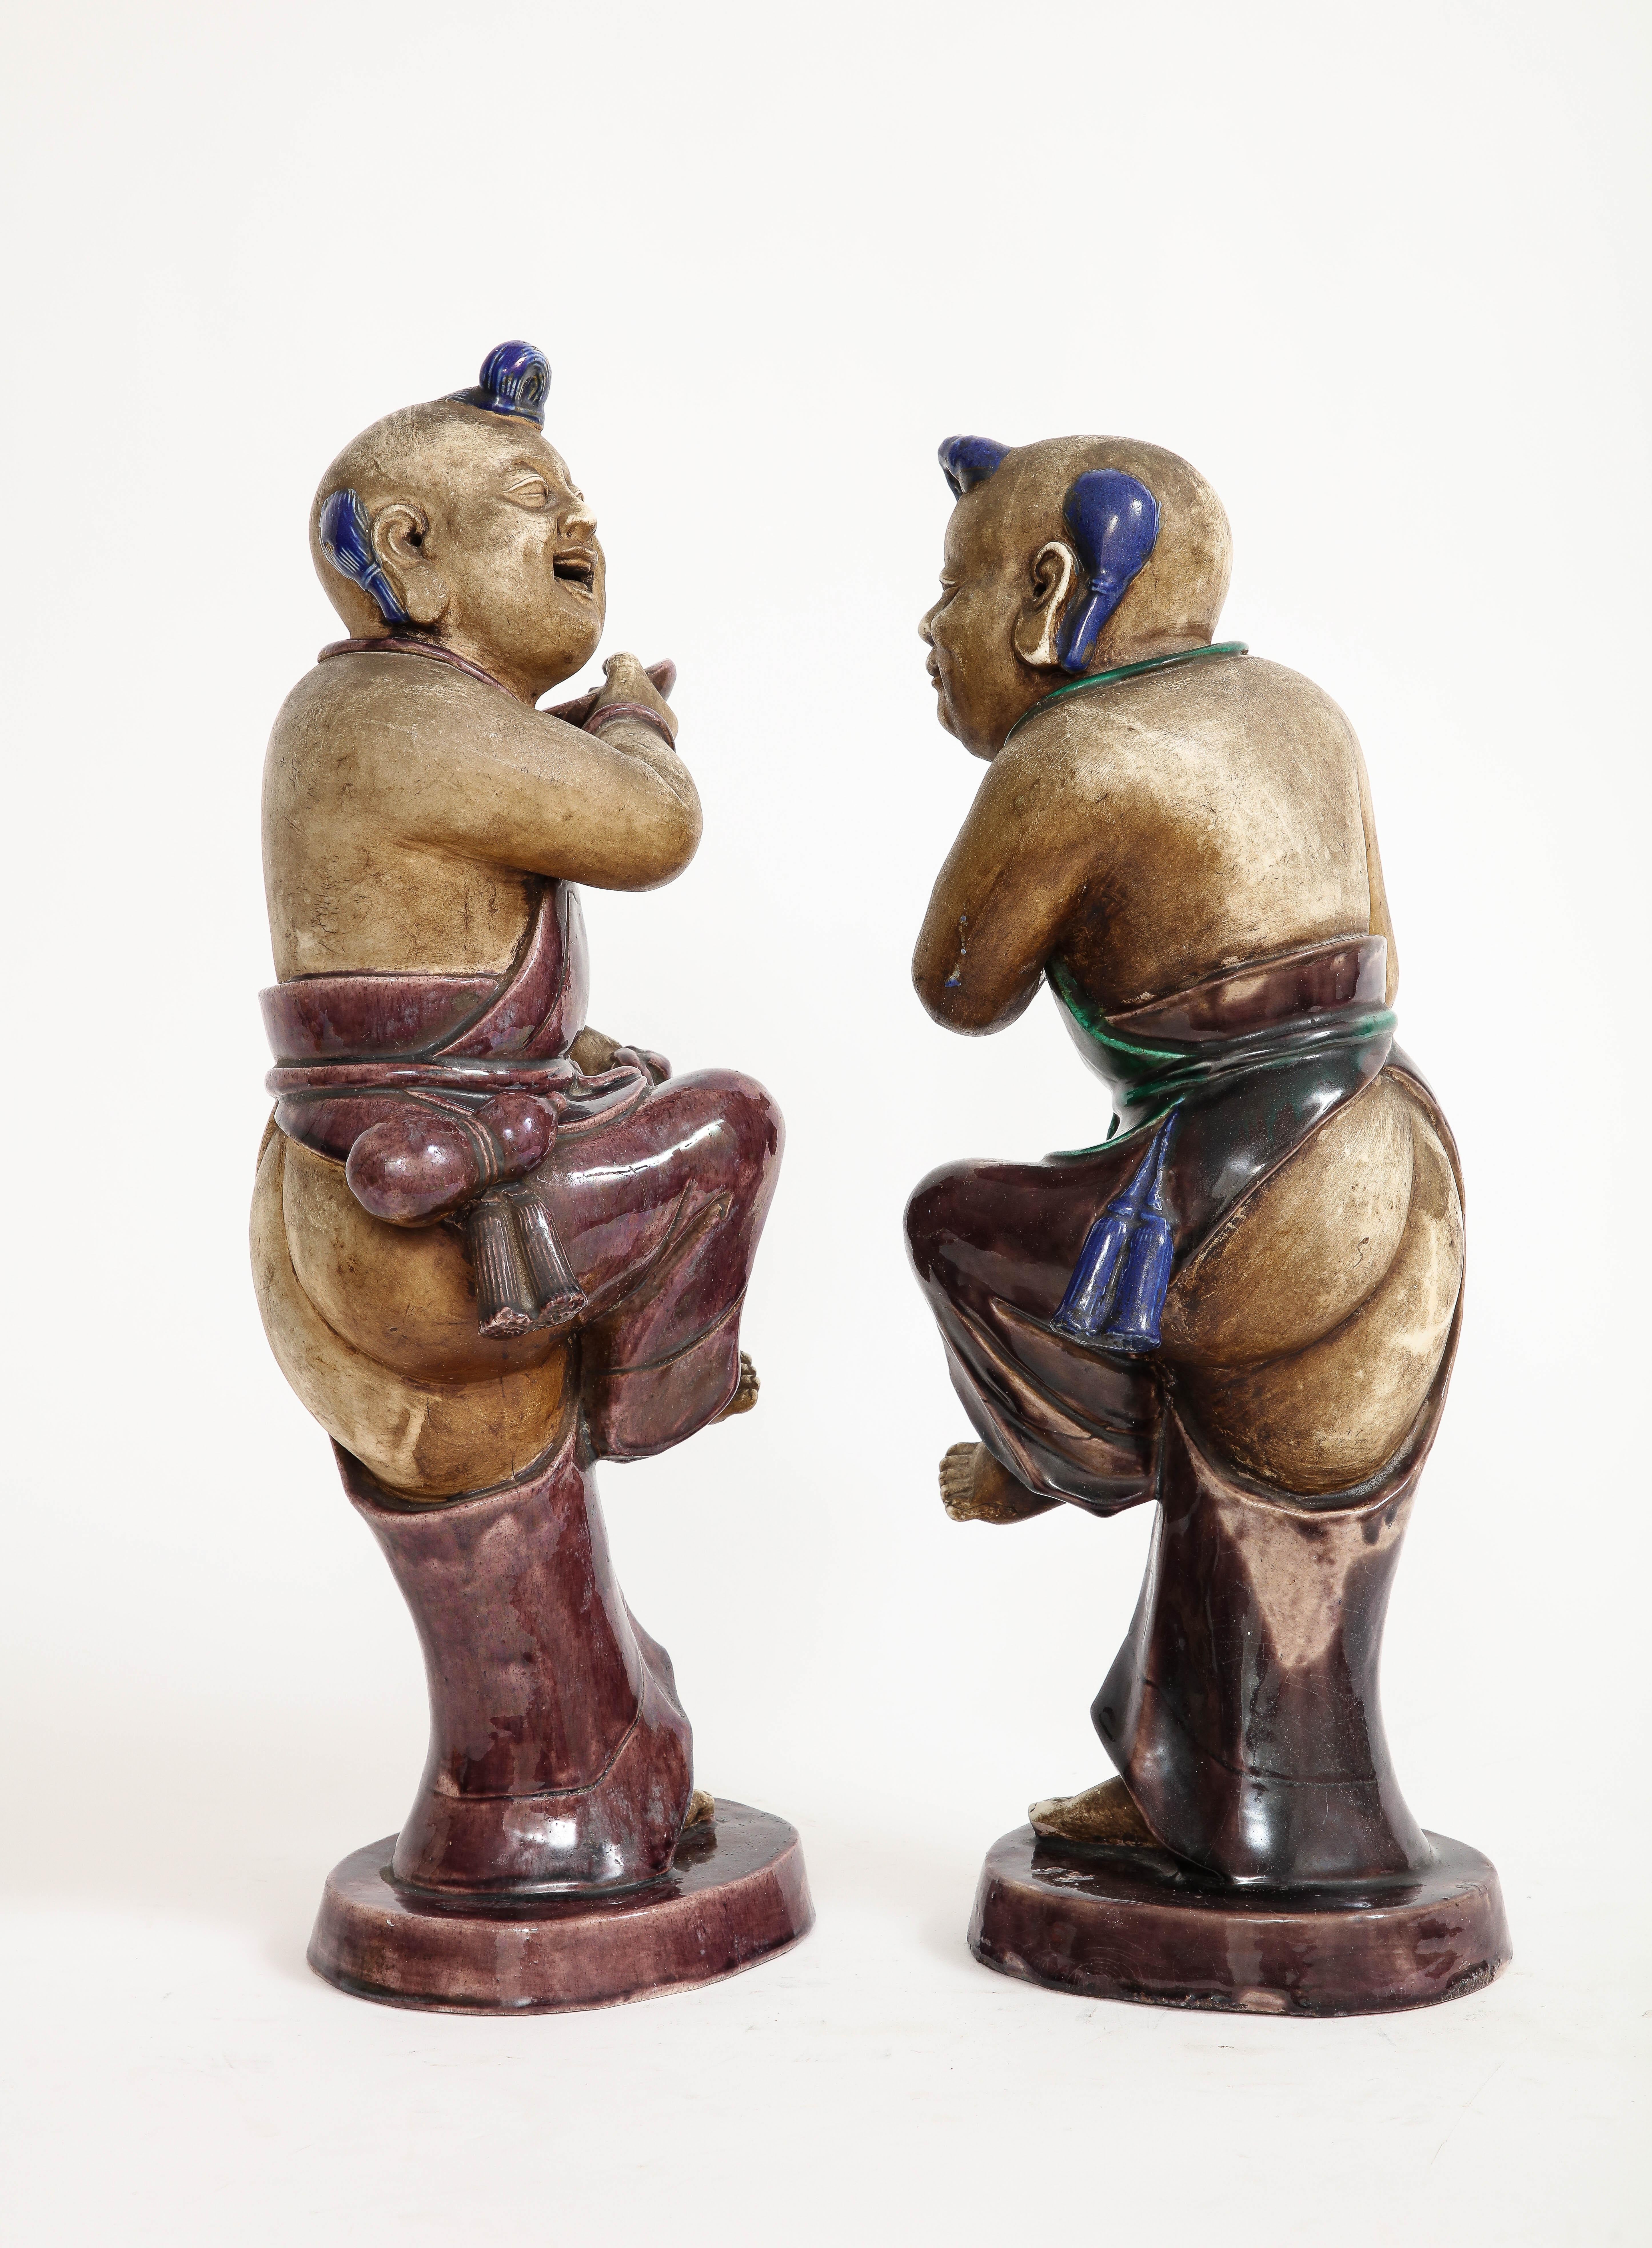 Early 18th Century A Rare Pair Chinese Kangxi Biscuit Porcelain Figures of Boy w/ Enamel Decoration For Sale